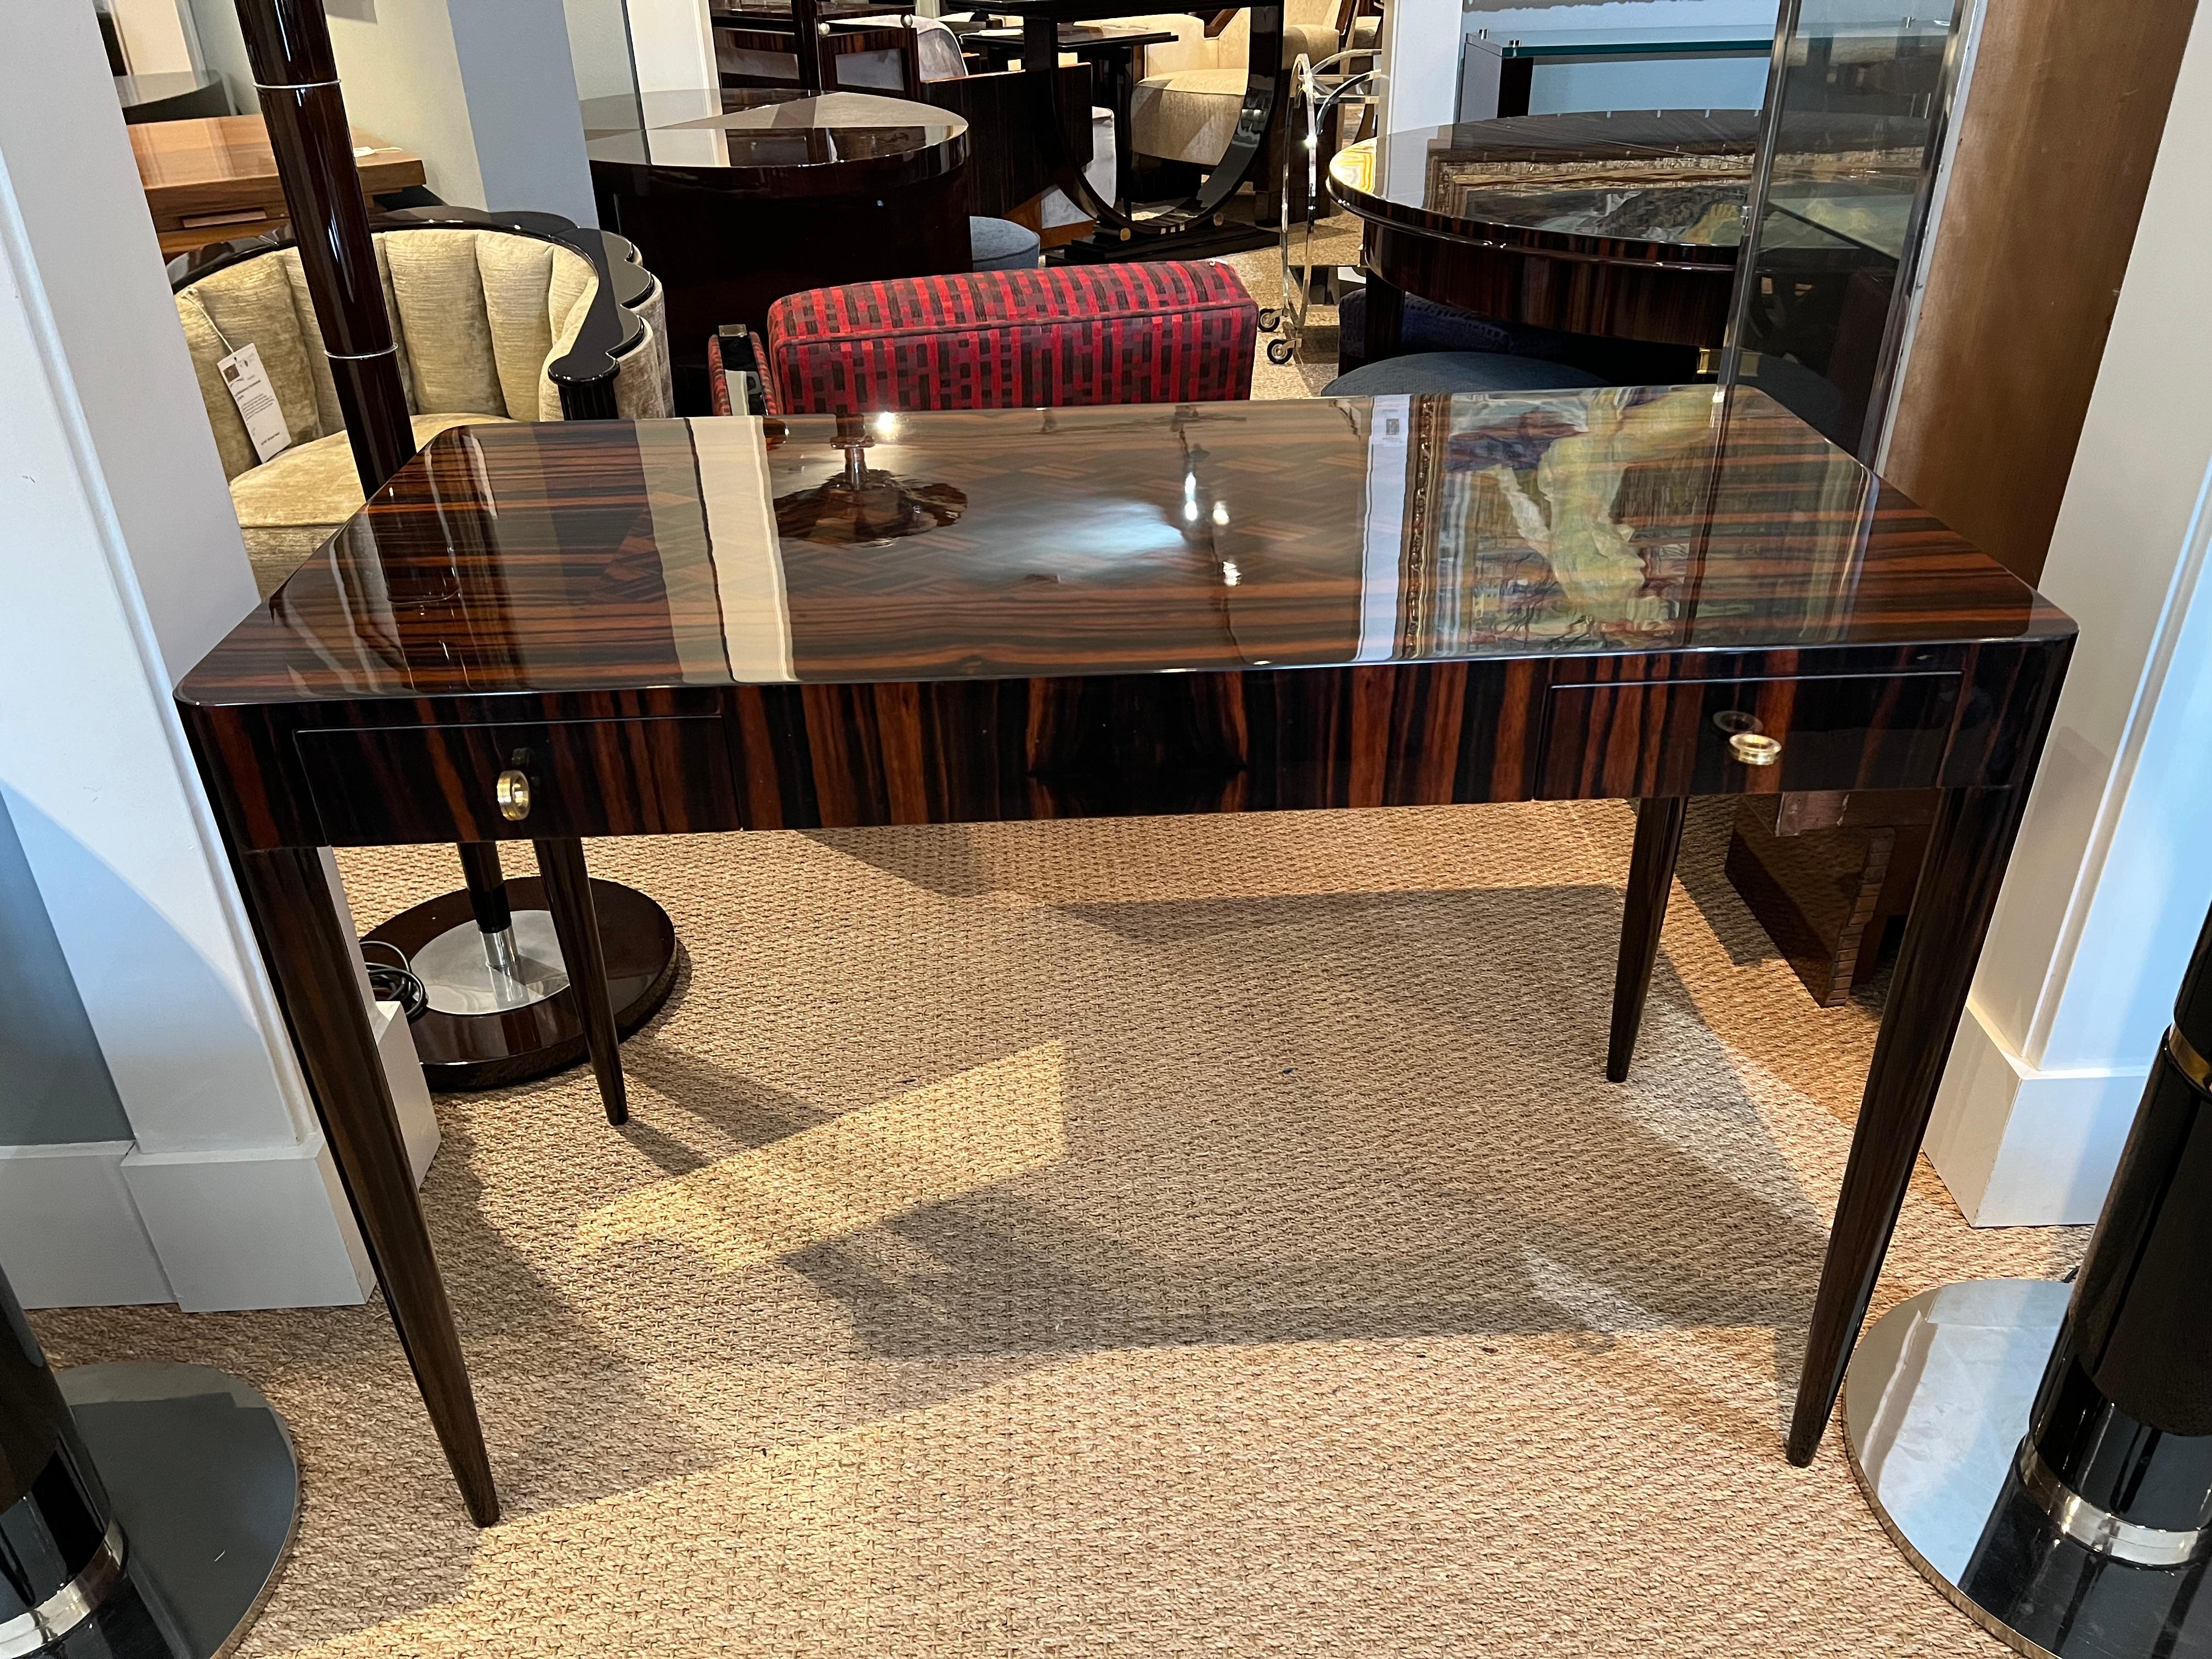 Art Deco French desk with parquet
tabletop in Macassar wood
Desk has a beautiful tabletop with inlaid parquet element. It has rounded corners and 2 keyed drawers upfront. Tabletop is elevated by 4 slim elongated legs.

Condition is